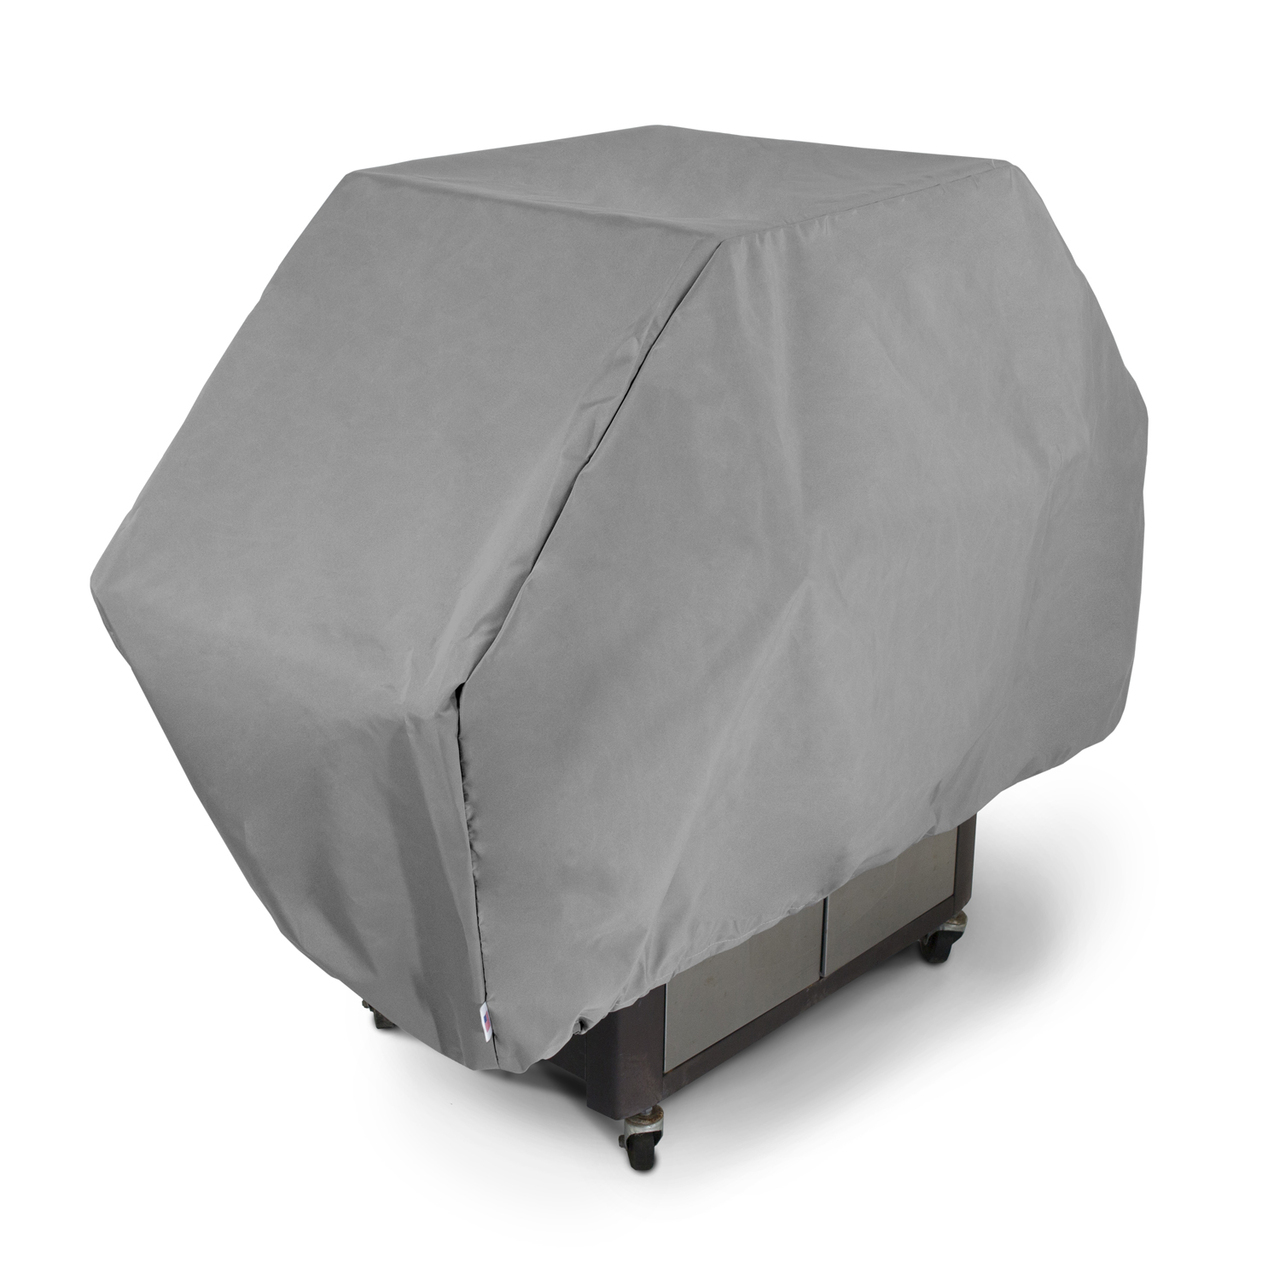 Grill Cover - 53W x 23D x 35H in.